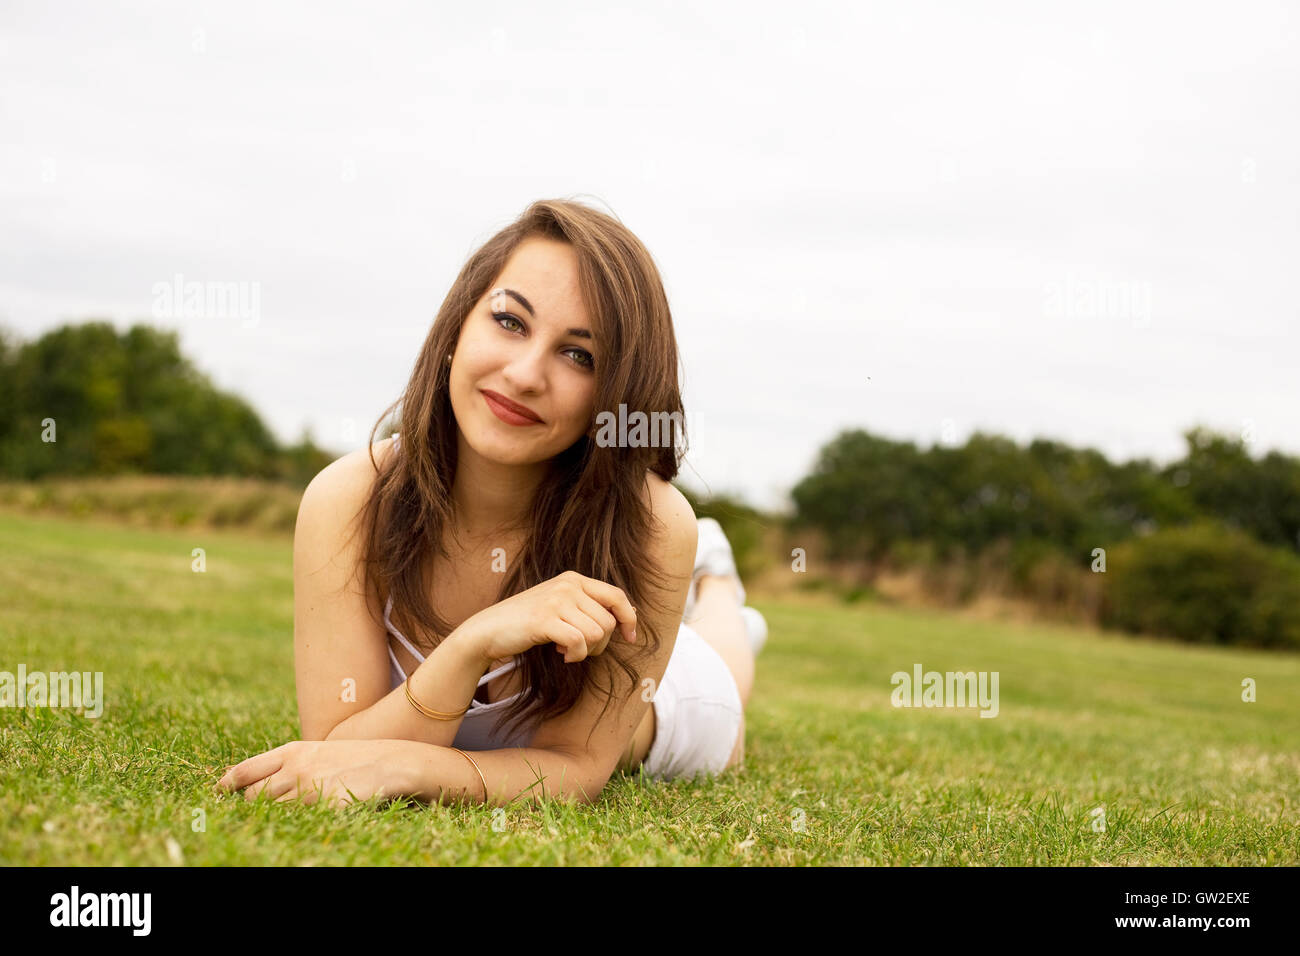 young woman enjoying a day in the park Stock Photo